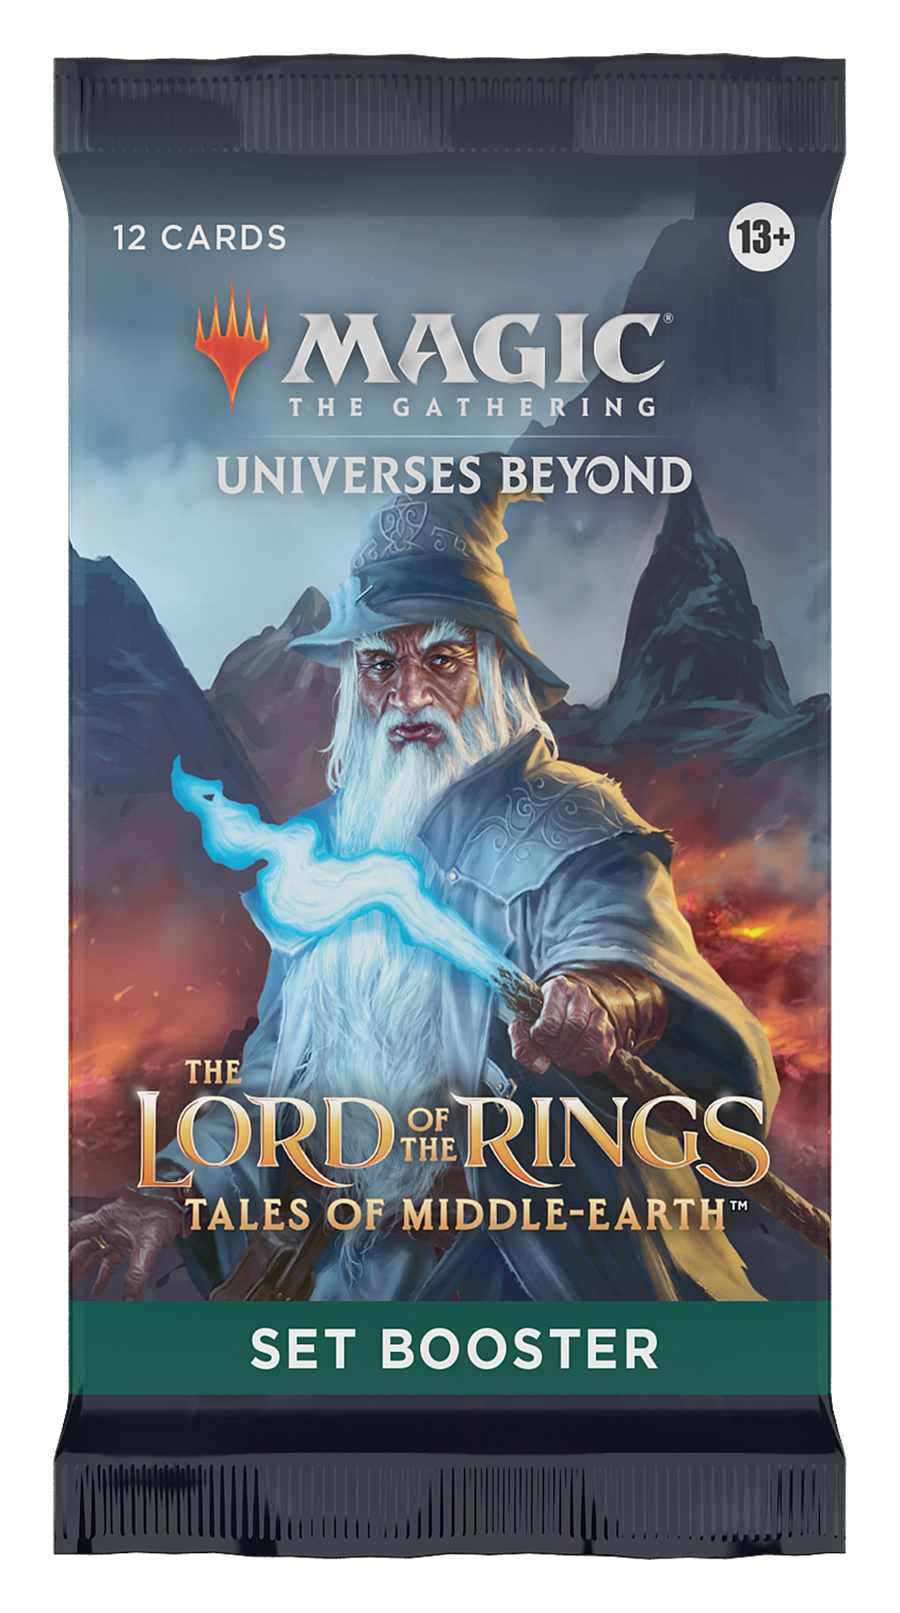 MTG - The Lord of the Rings: Tales of Middle-earth™ Set Booster - EN